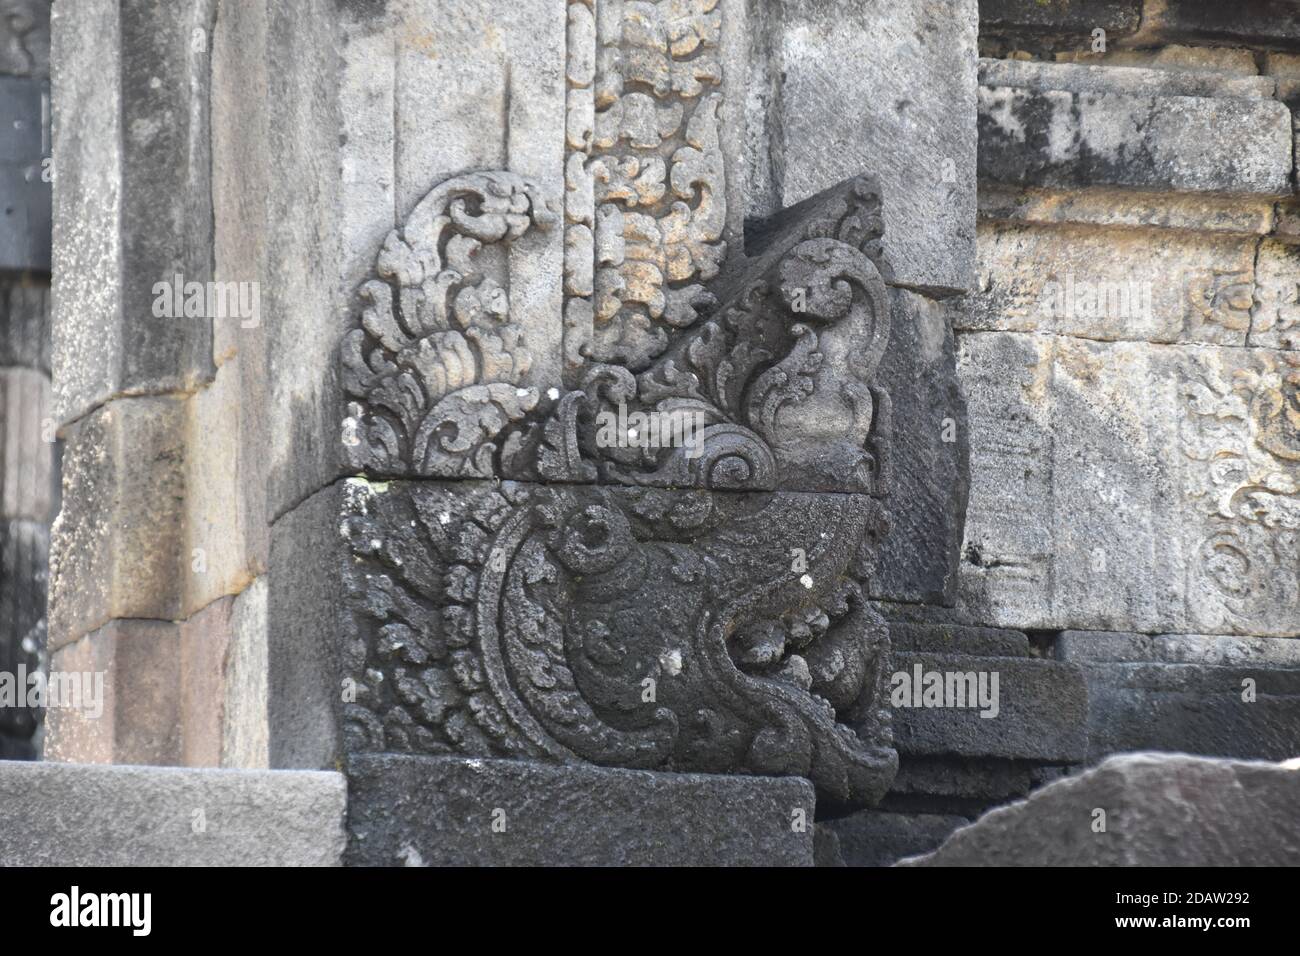 Makara carving on the wall of the main temple in the Sambisari Temple complex, Yogyakarta, Indonesia Stock Photo